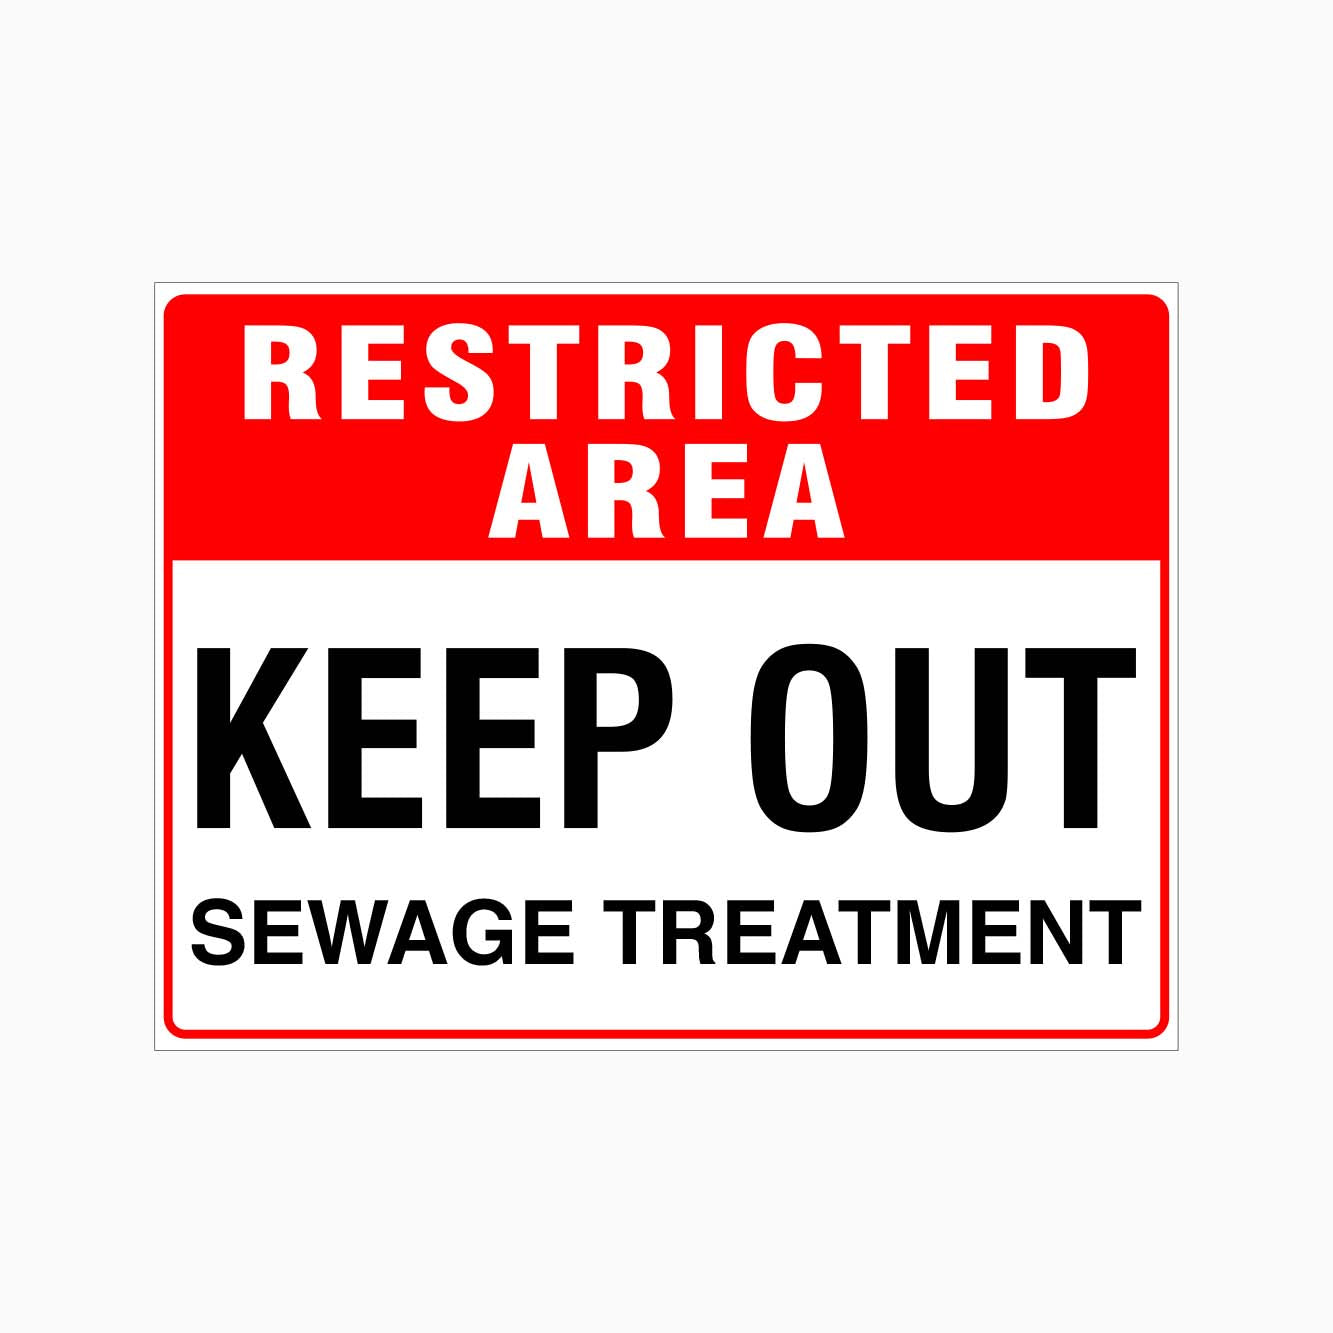 RESTRICTED AREA KEEP OUT SEWAGE TREATMENT SIGN - GET SIGNS